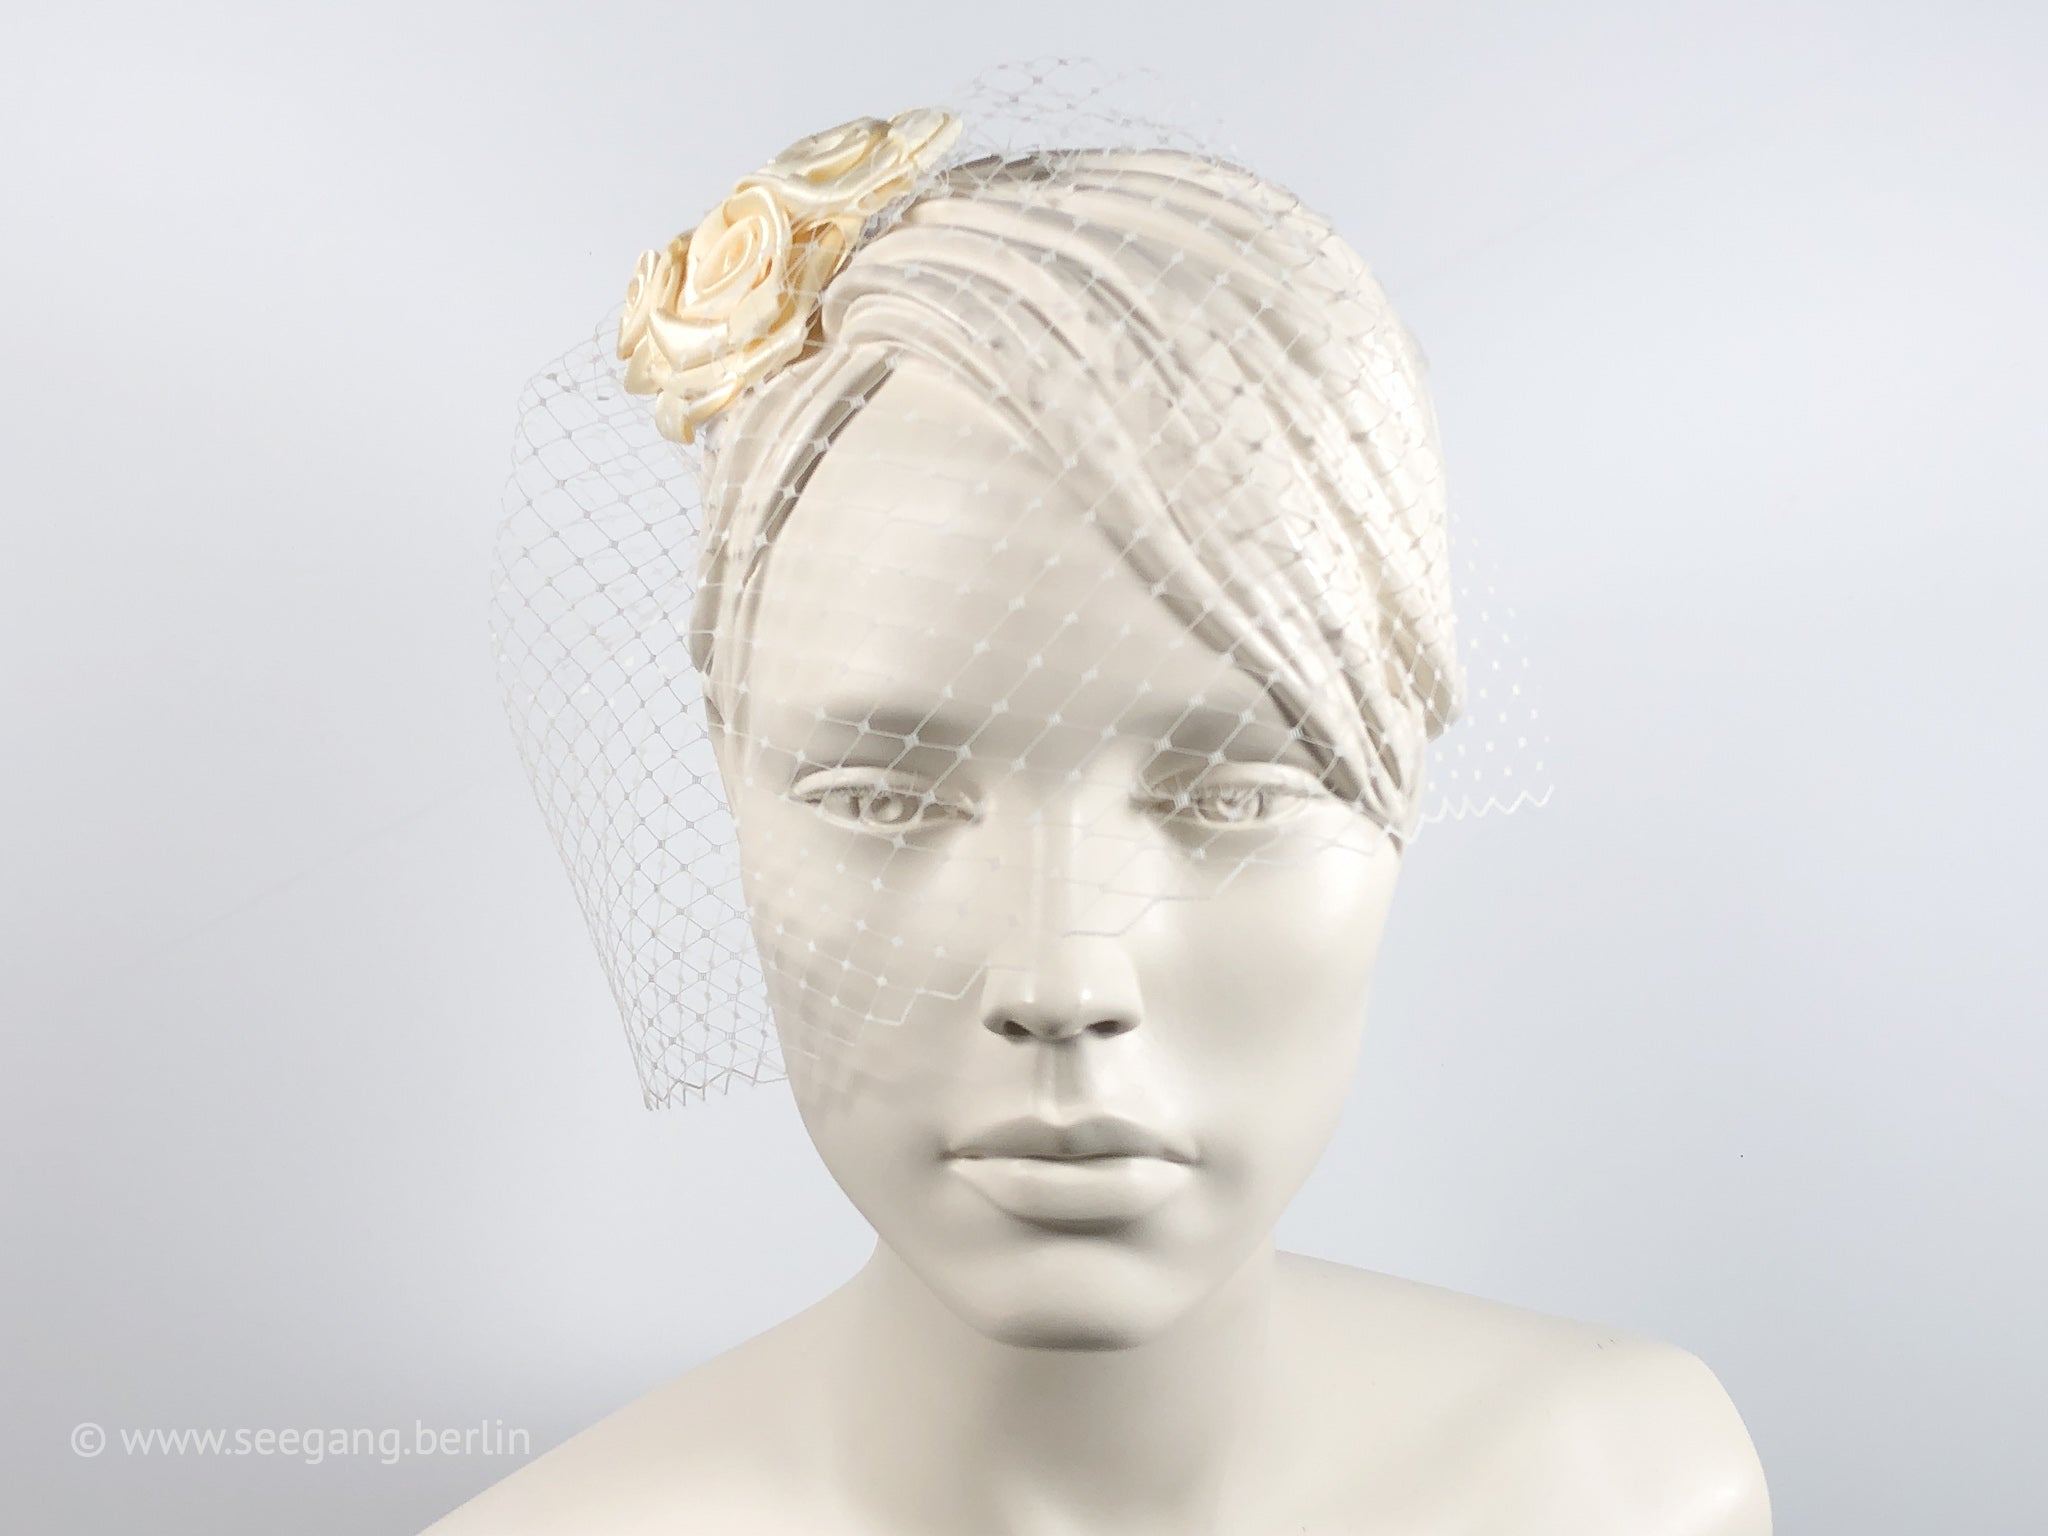 BIRDCAGE - BRIDAL VEIL HEADDRESS WITH ROSES IN SHADES OFF WHITE, CREME, IVORY AND CHAMPAGNE